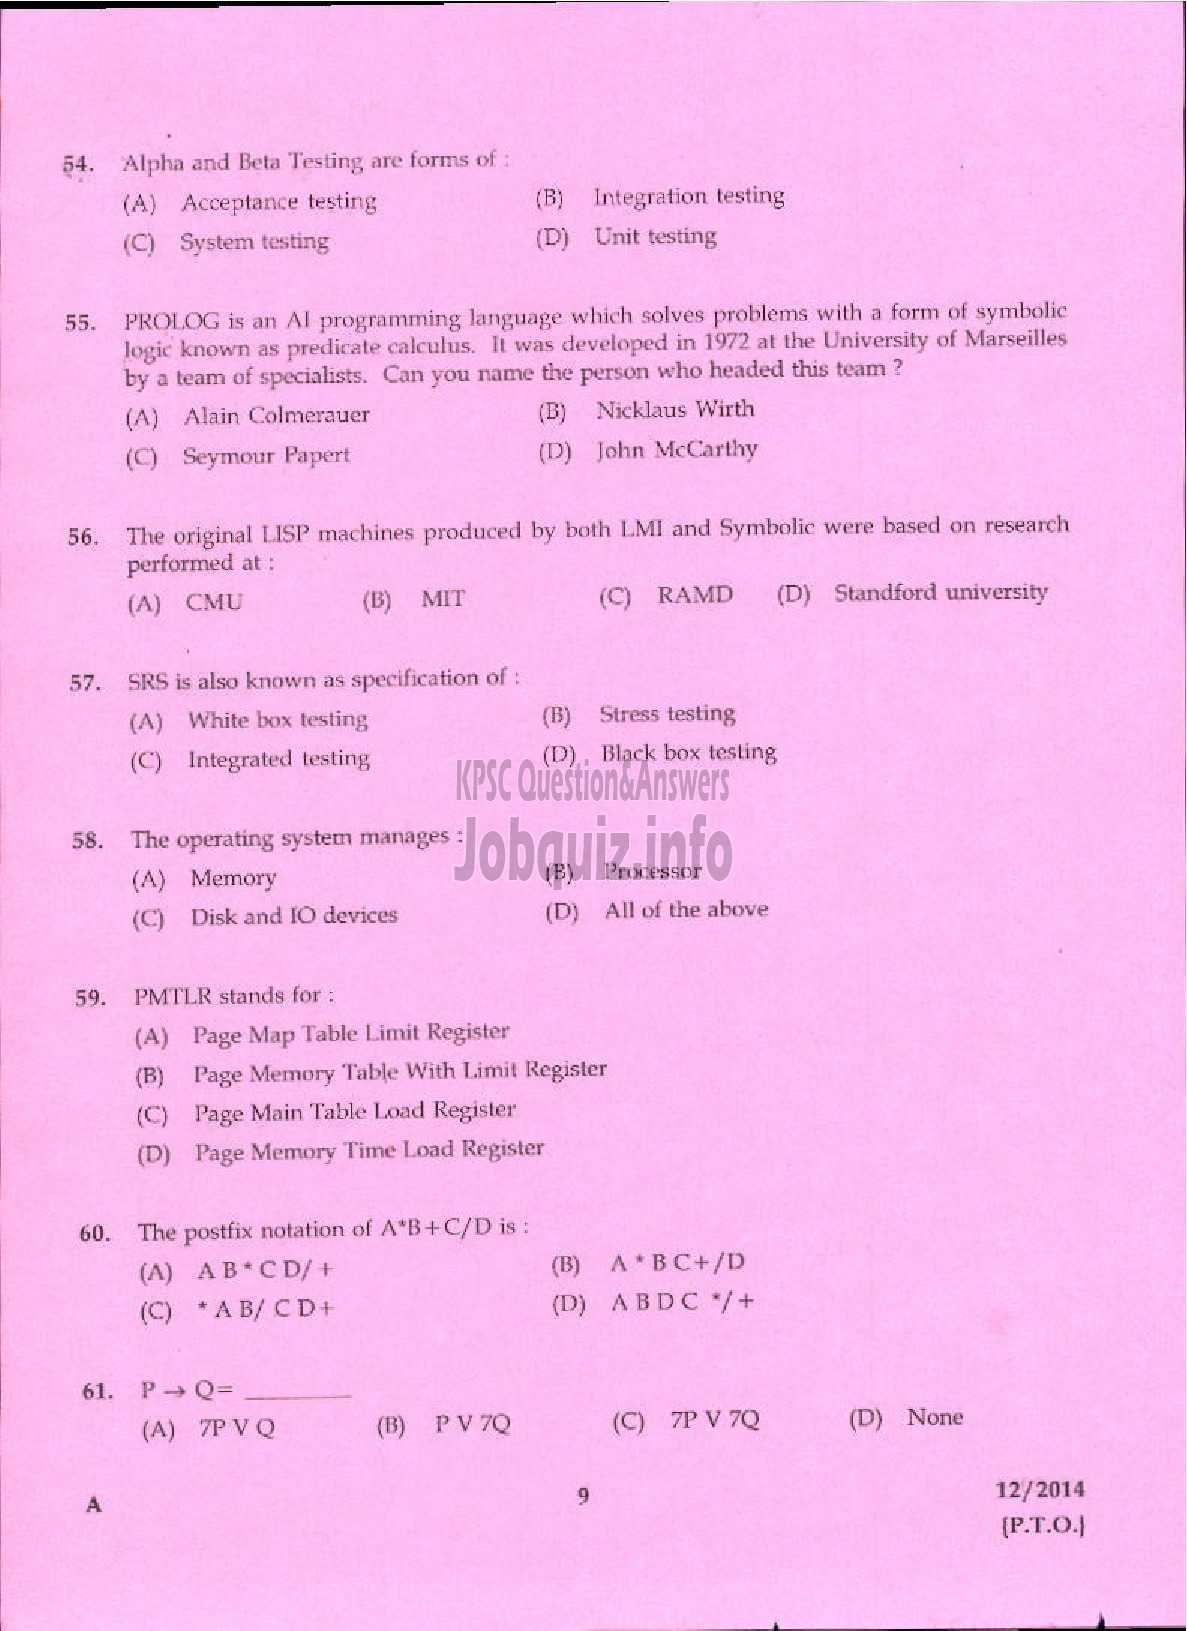 Kerala PSC Question Paper - VOCATIONAL INSTRUCTOR IN COMPUTER APPLICATION VHSE-7